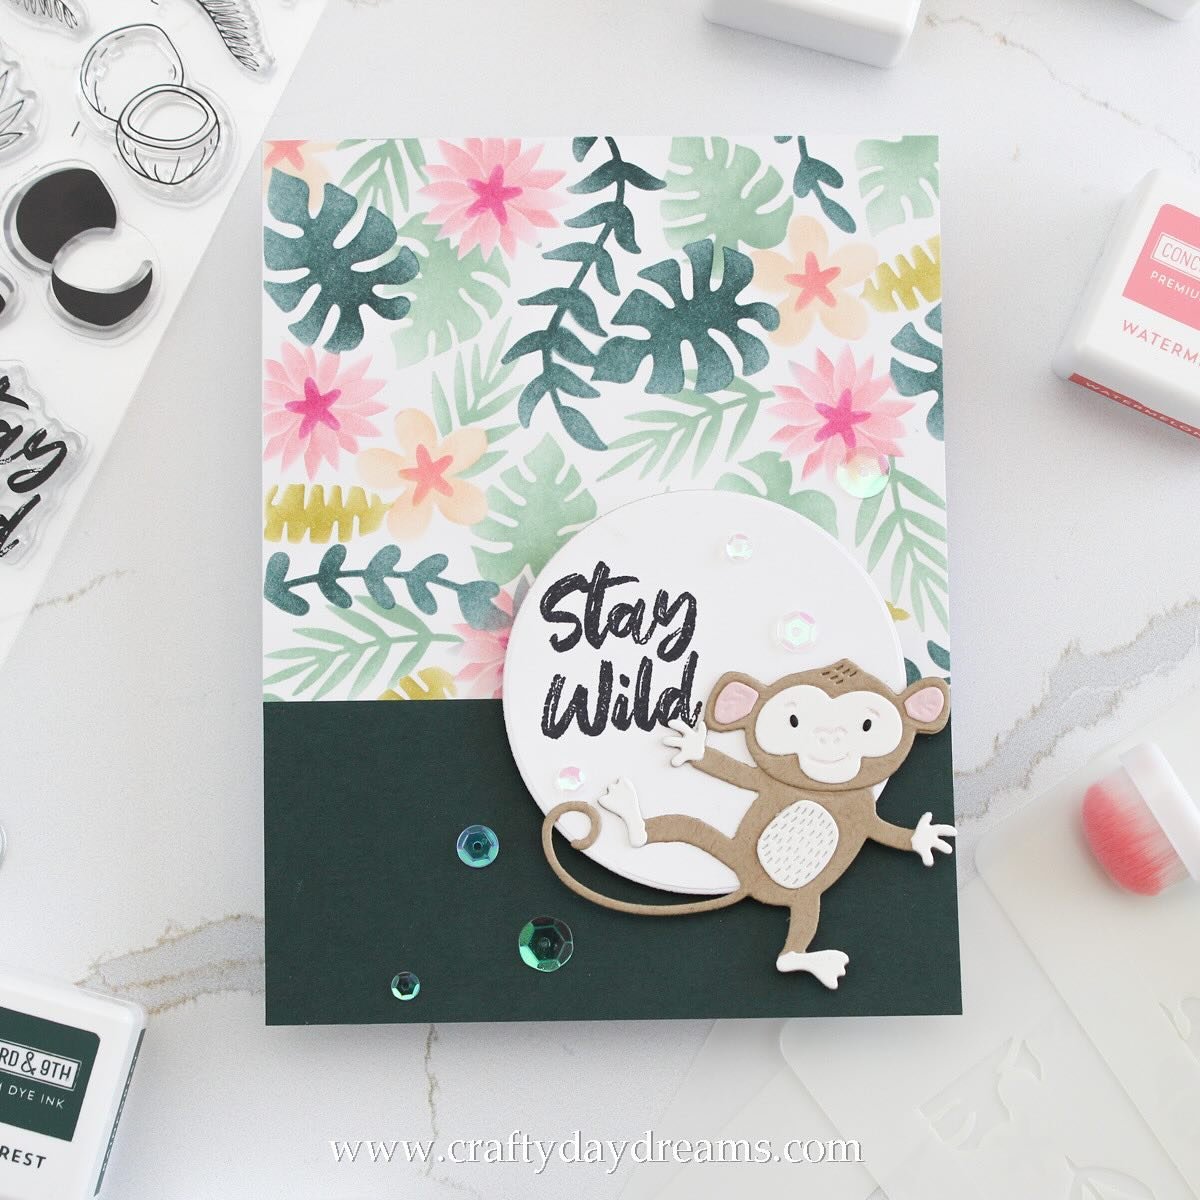 Happy Saturday!🌺

Today I&rsquo;m so excited to share these cuties! I got to play around with some new goodies from @sizzix and @catherinepooler and I love how these cards turned out!! I think the new Stamp &amp; Spin just might be the most fun I&rs